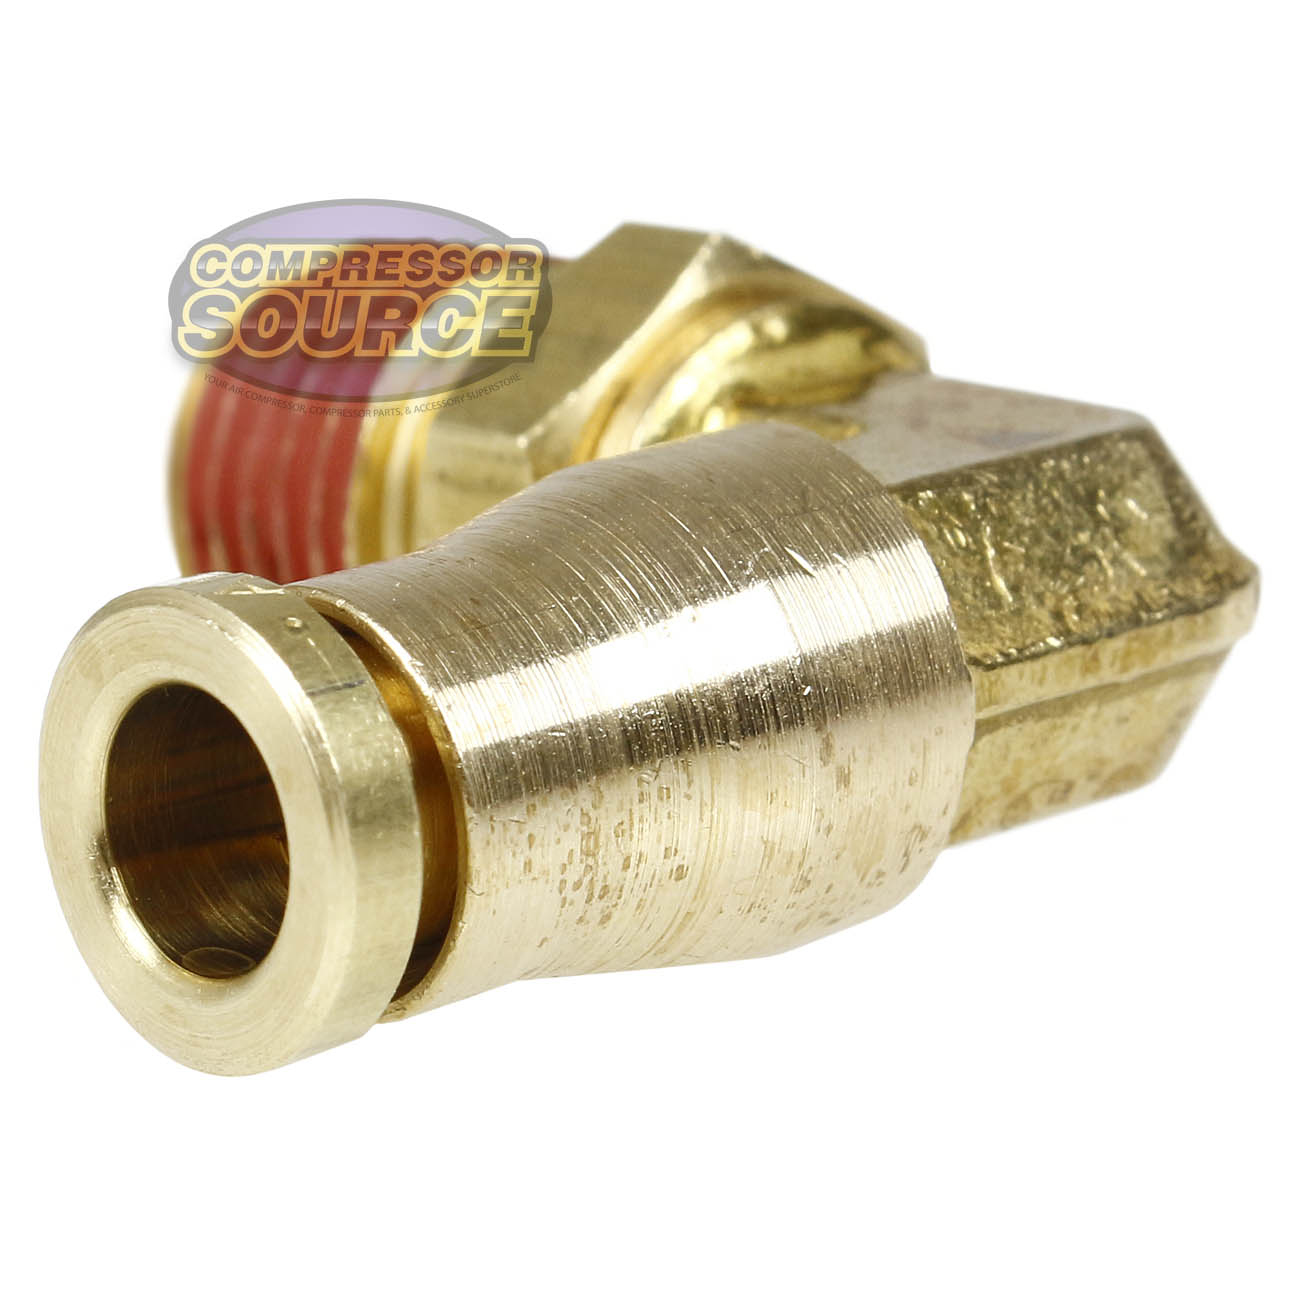 1/4" x 1/4" Push-In x Male NPTF Swivel Elbow Solid Brass Quick Connect Fitting